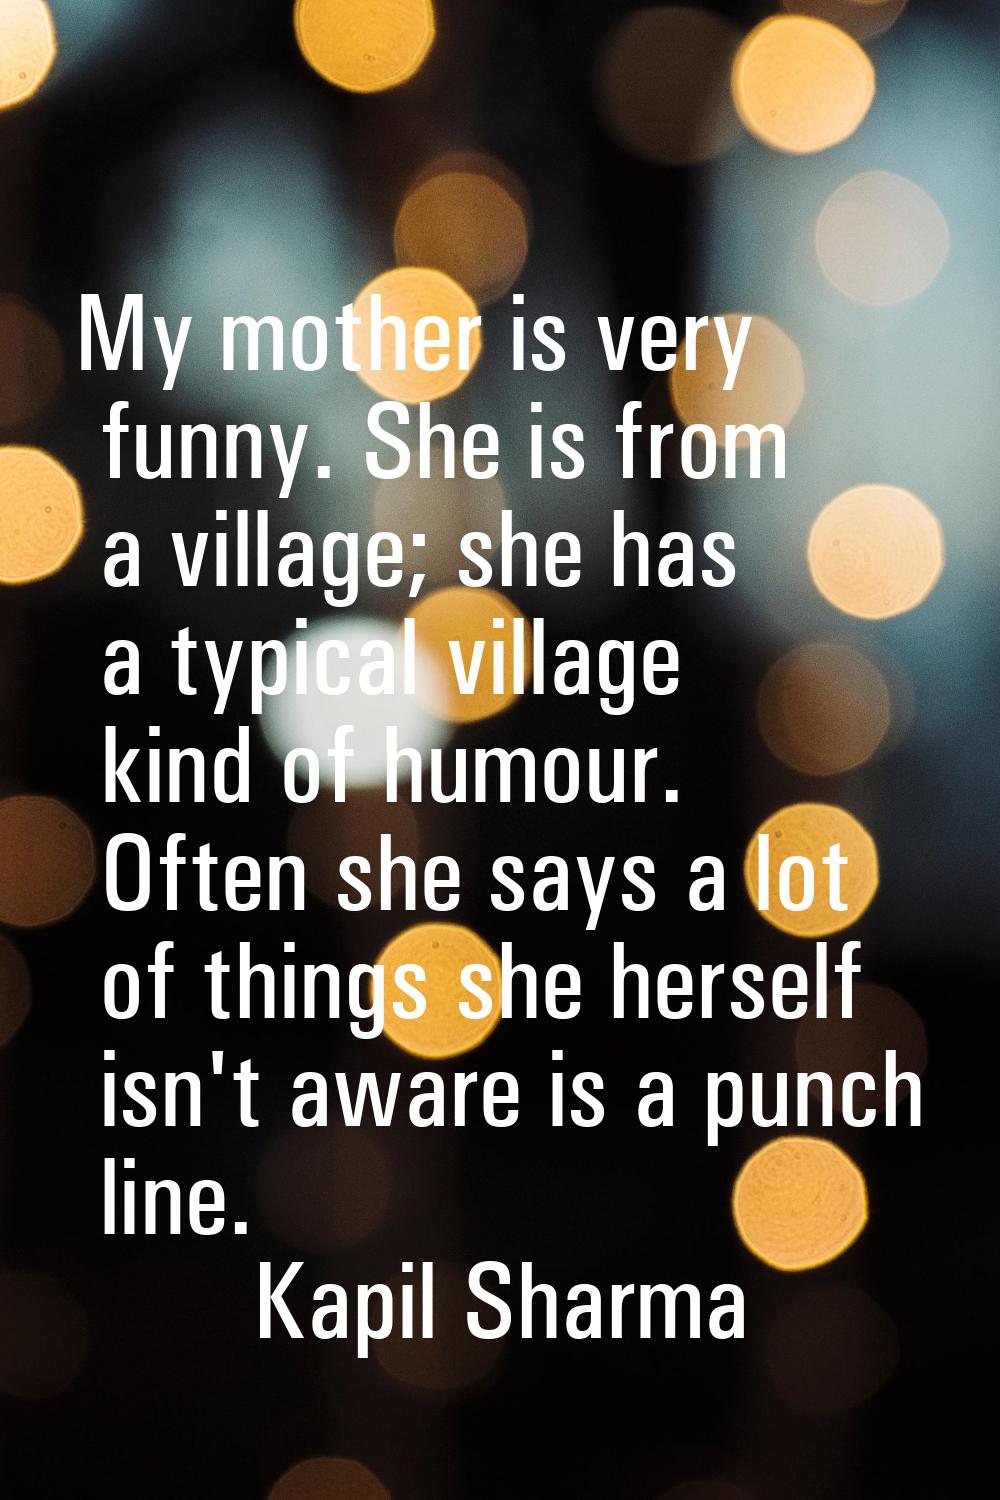 My mother is very funny. She is from a village; she has a typical village kind of humour. Often she